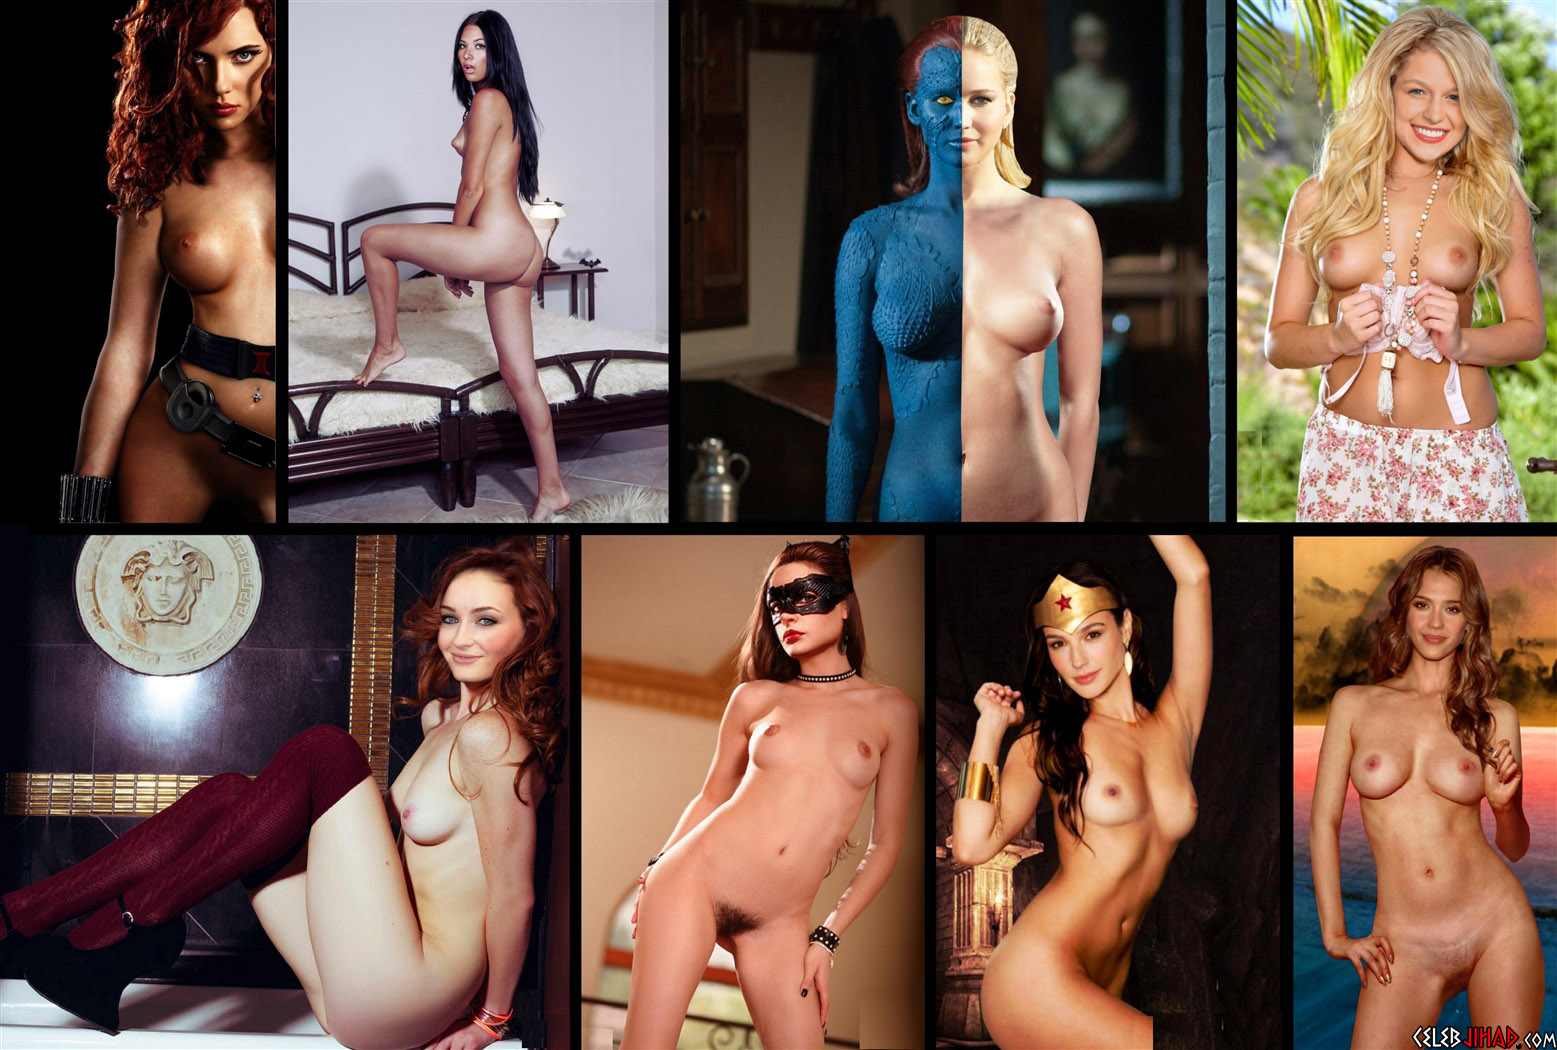 Female marvel characters naked